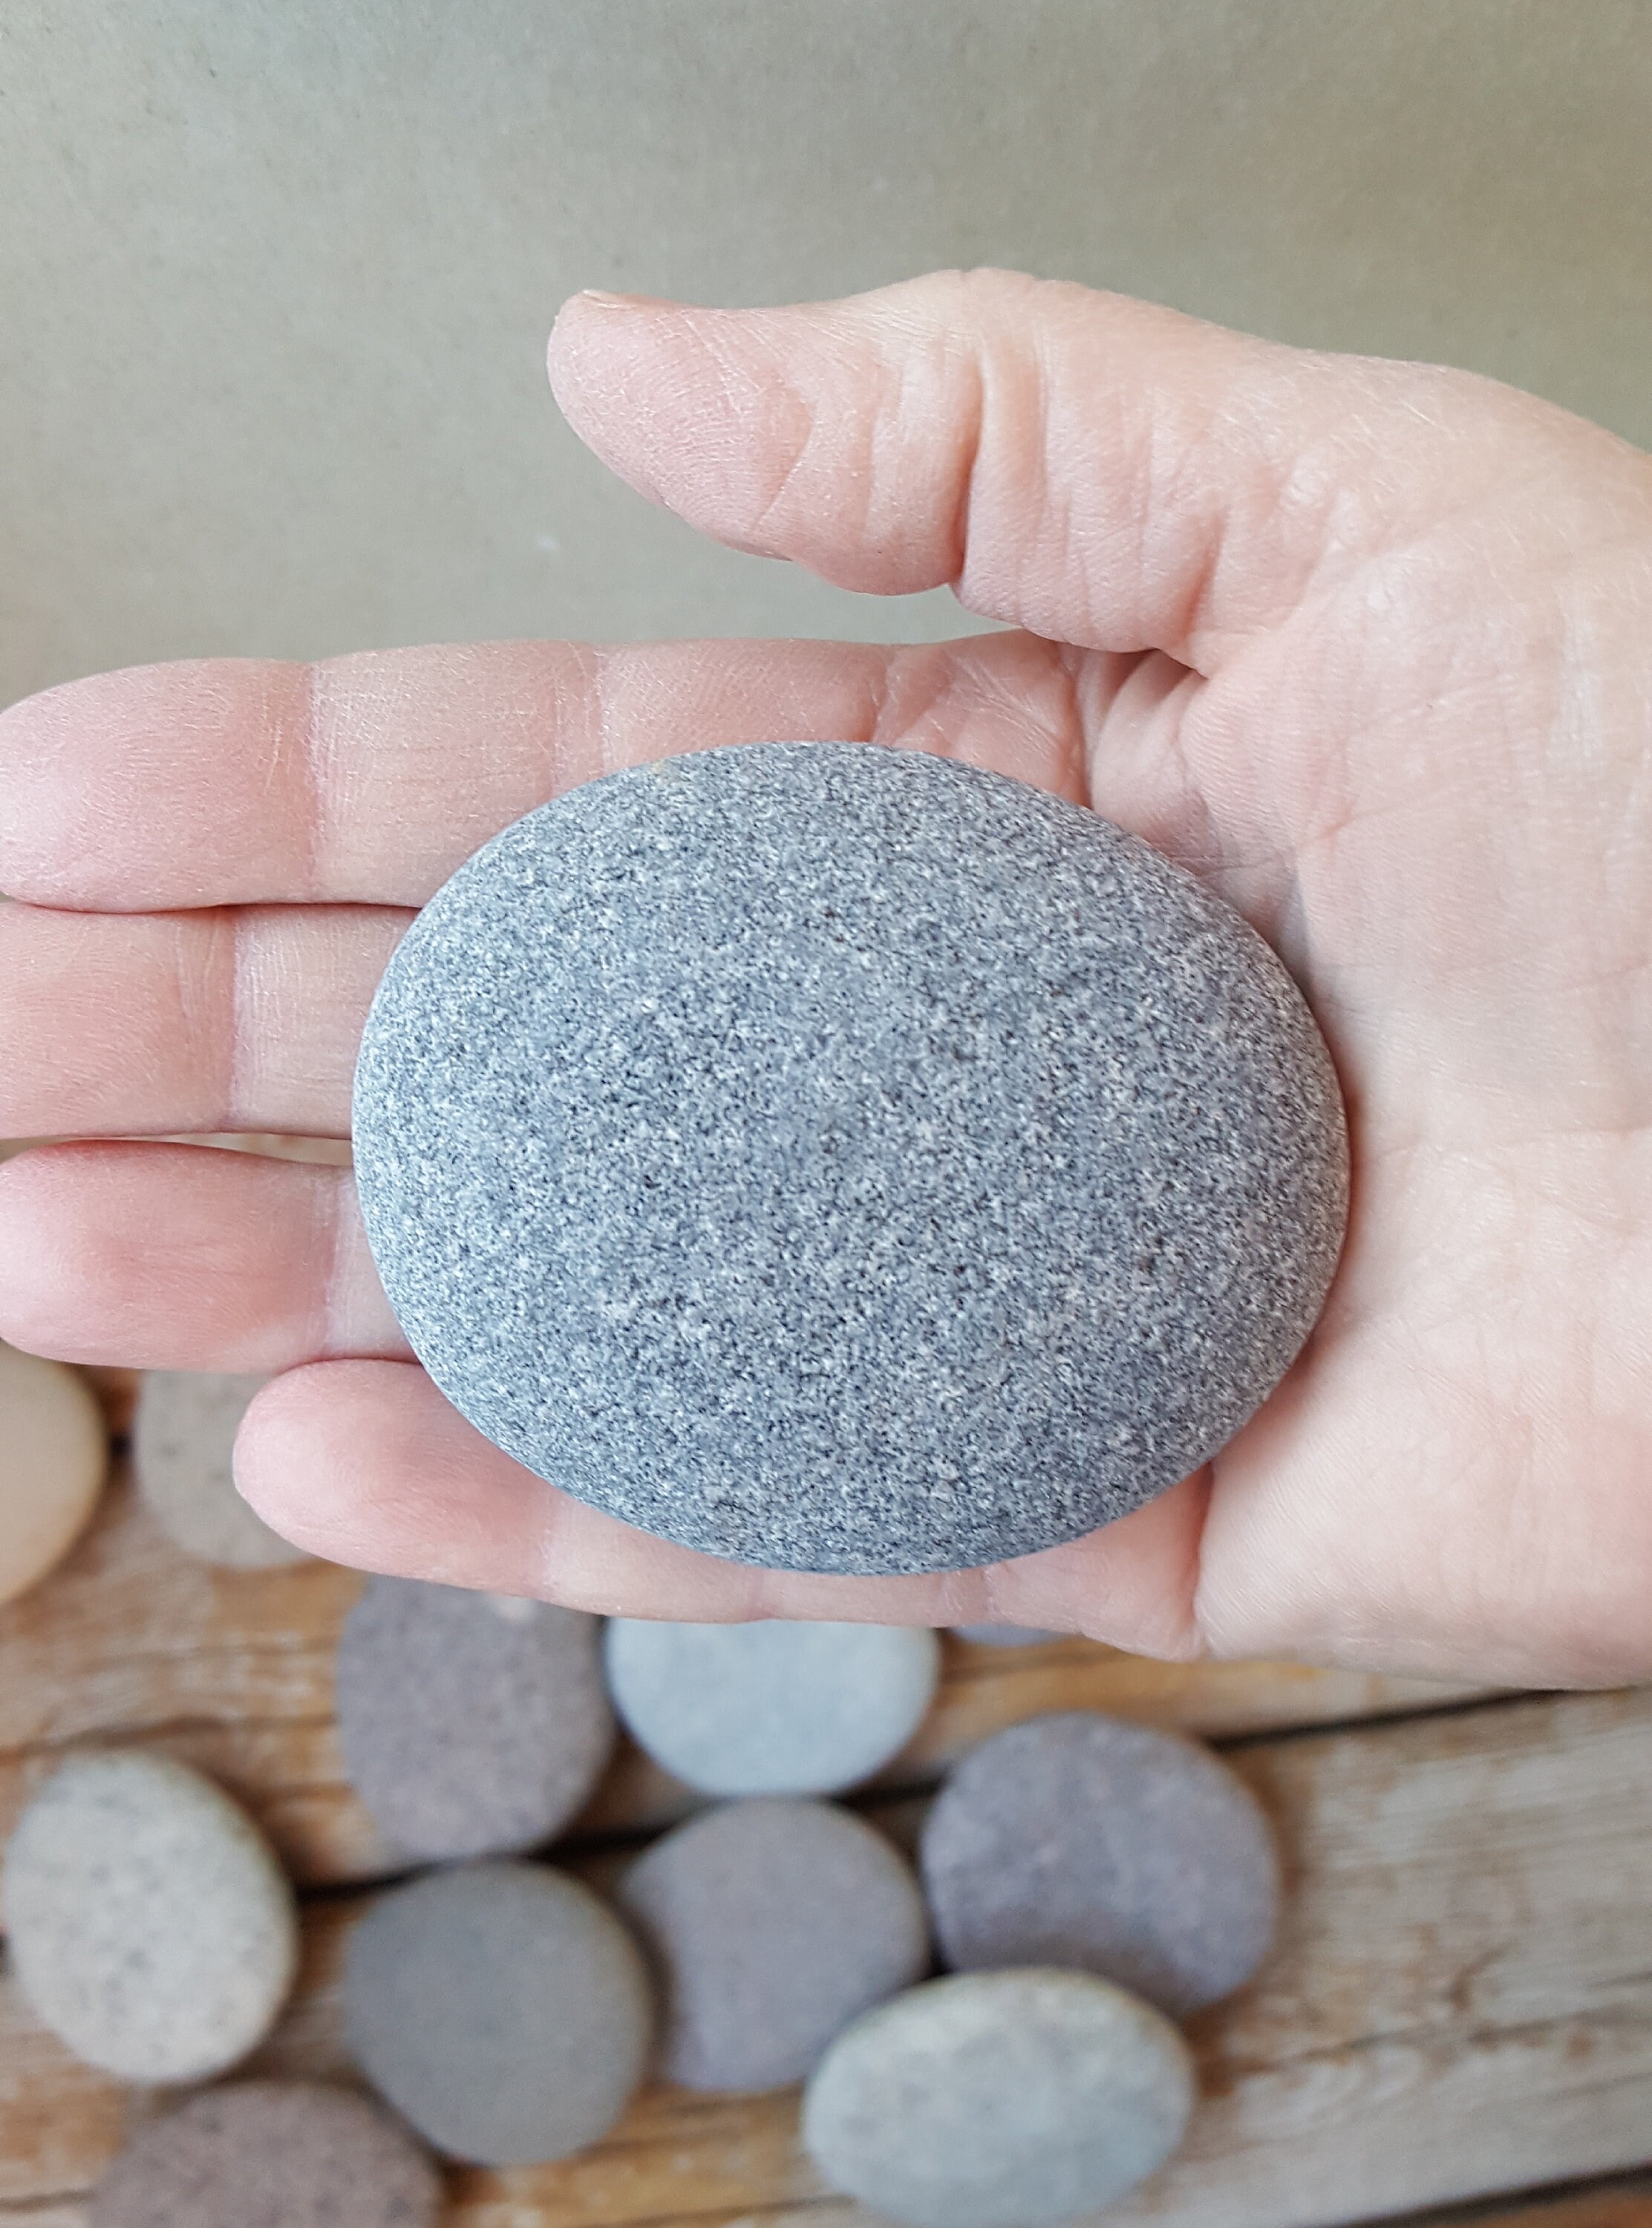 2.362.75large Sea Stones stones for Painting beach Stones mandala Stones-stones  for Crafts Mandala Rocks 